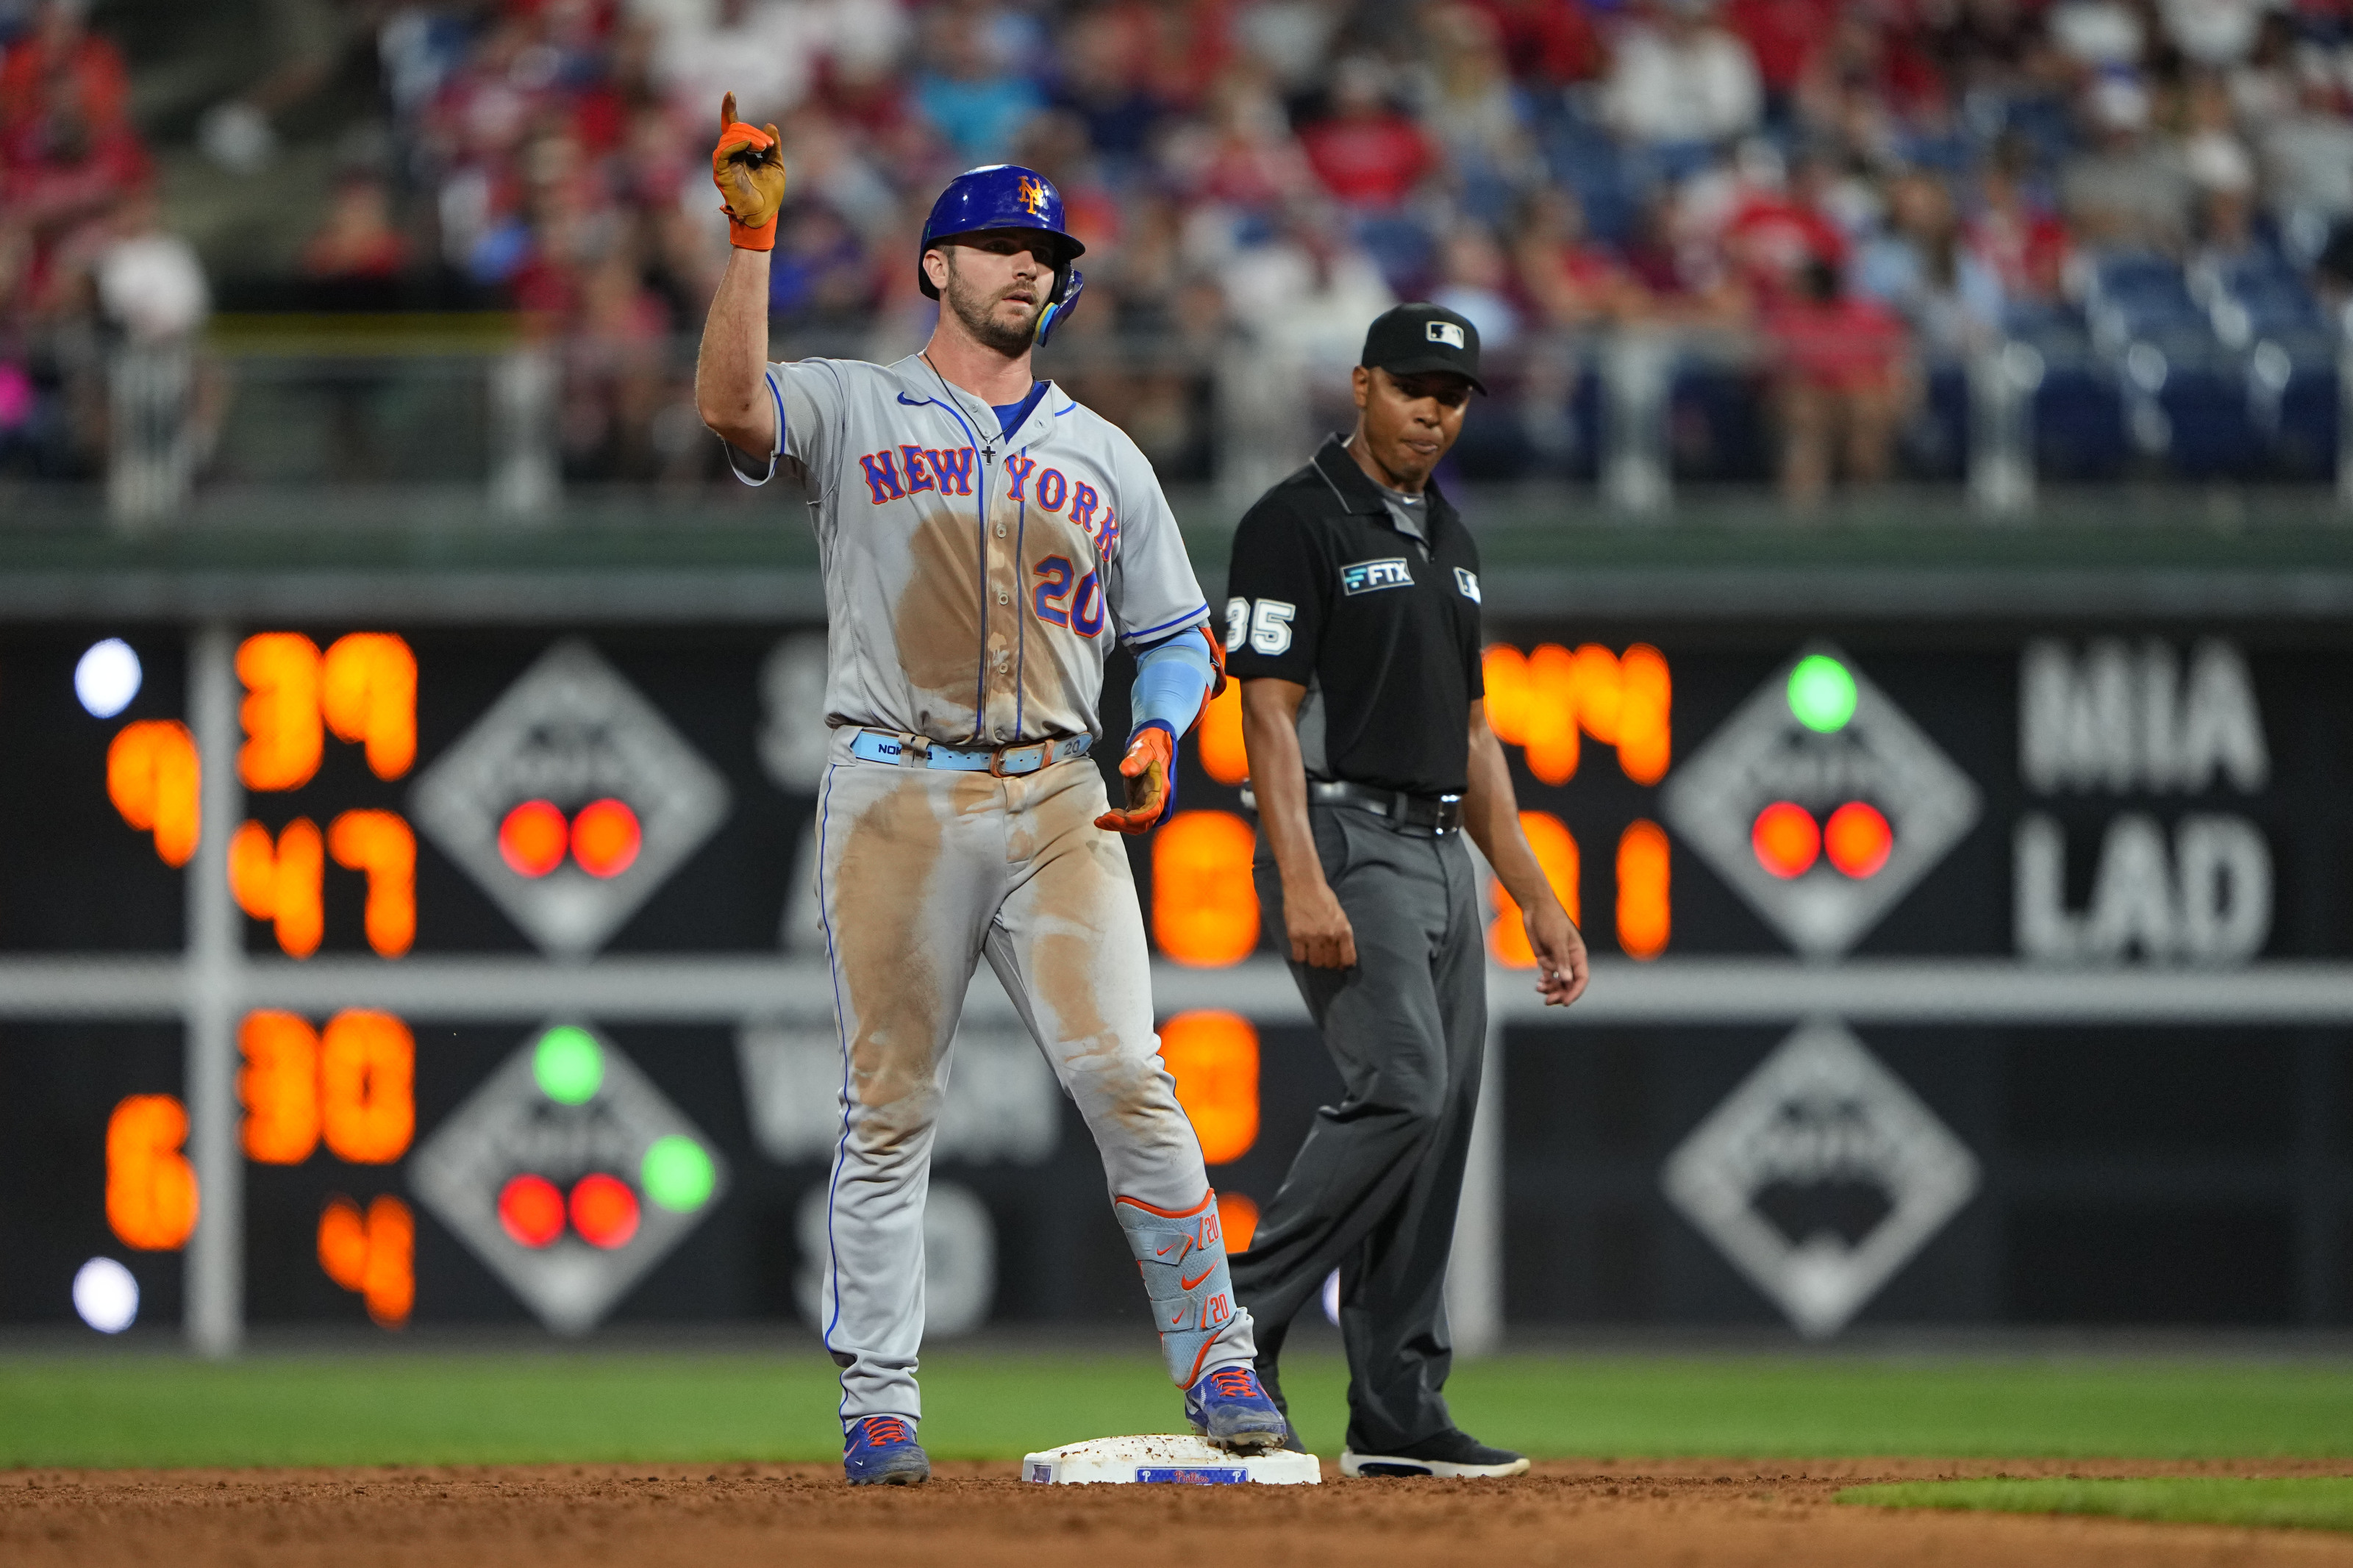 NL East standings 2022: First place updates for Mets, Braves, MLB